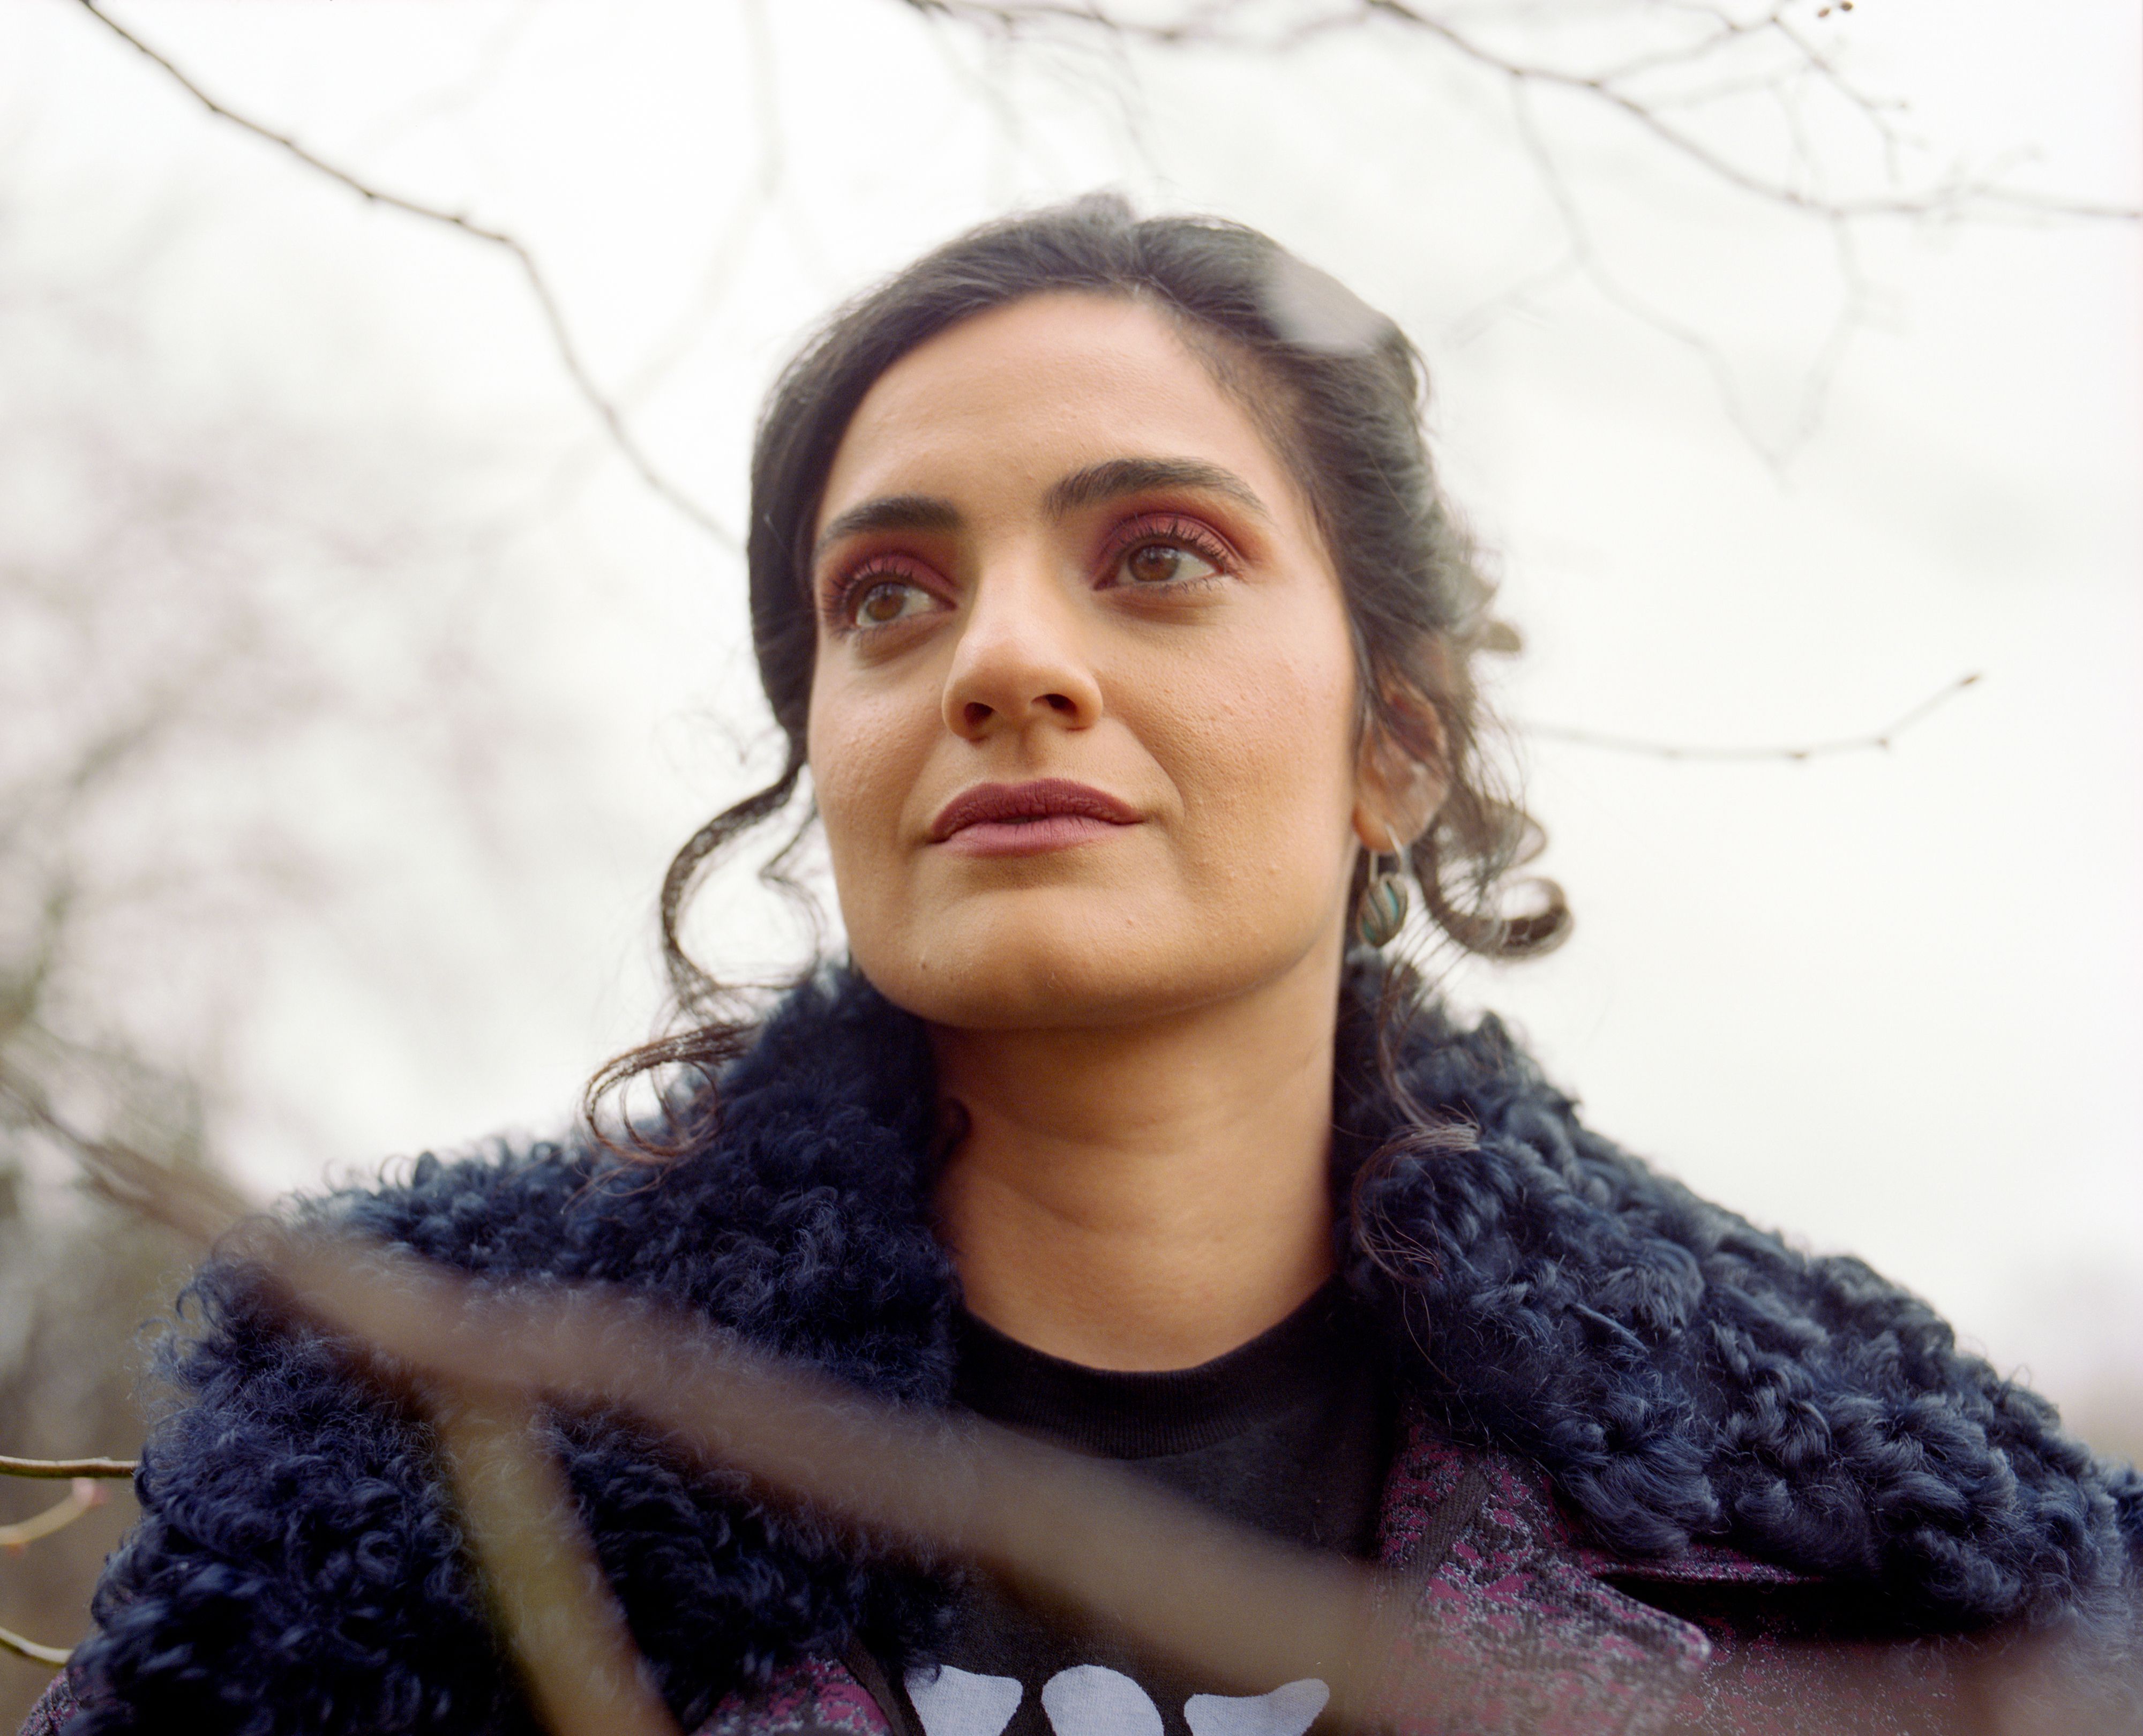 Manzoor has plenty on her plate right now, including writing the second season of “We Are Lady Parts.” Beyond that, she wants to continue making the kinds of movies she loved growing up: big spectacle movies, but with “women of color at the heart of them.”